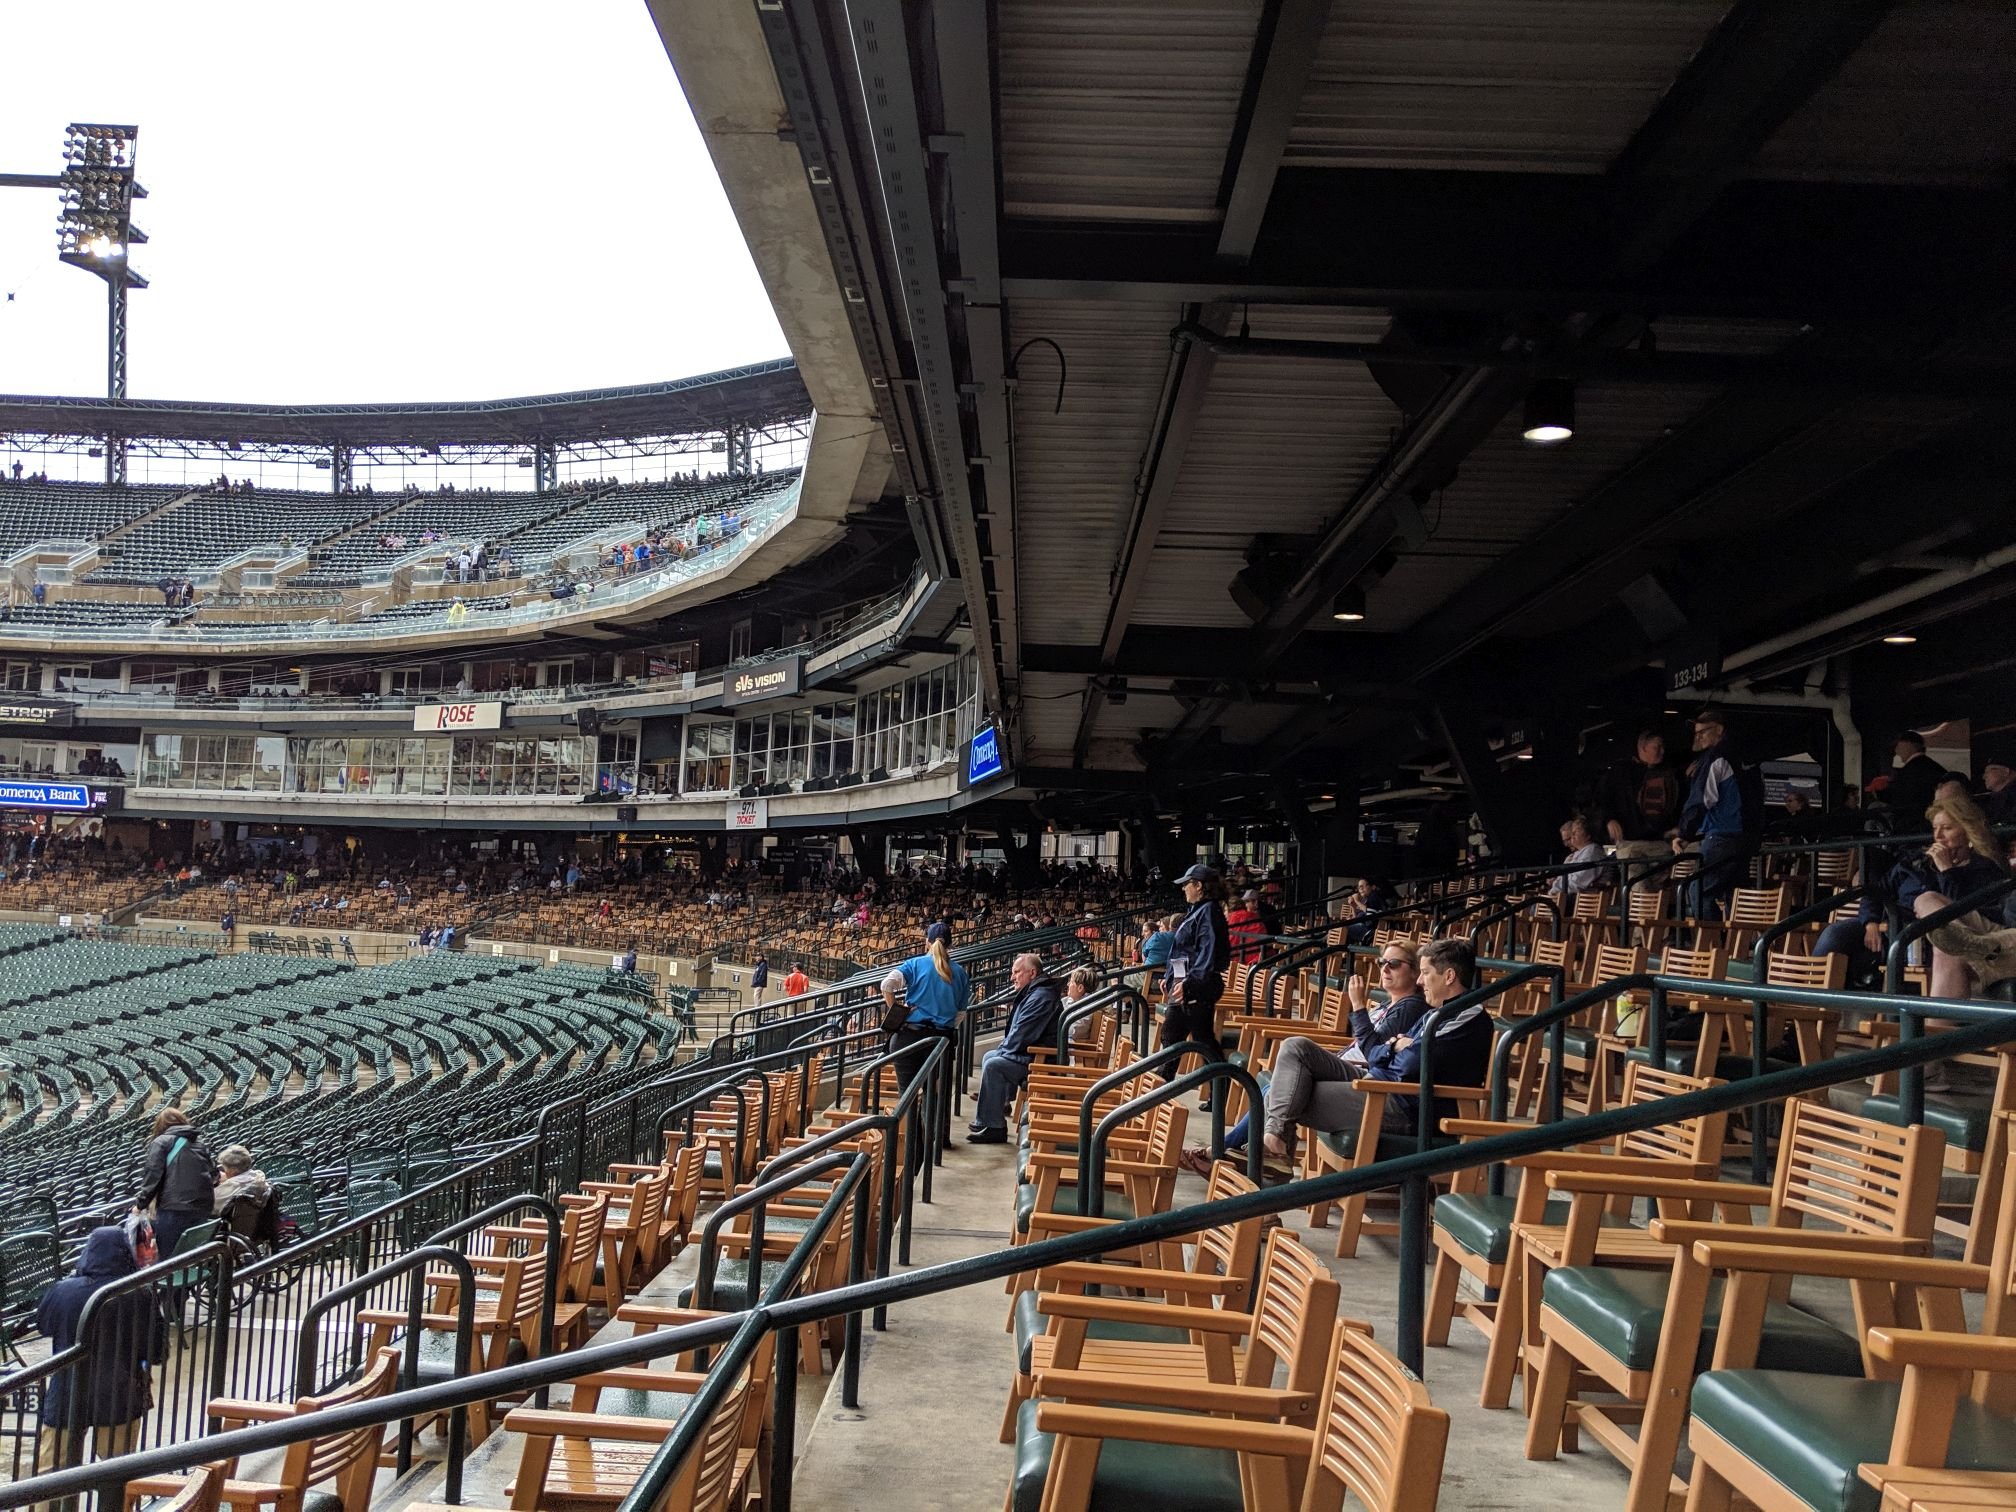 Shaded Seats at Comerica Park - Find Tigers Tickets in the Shade